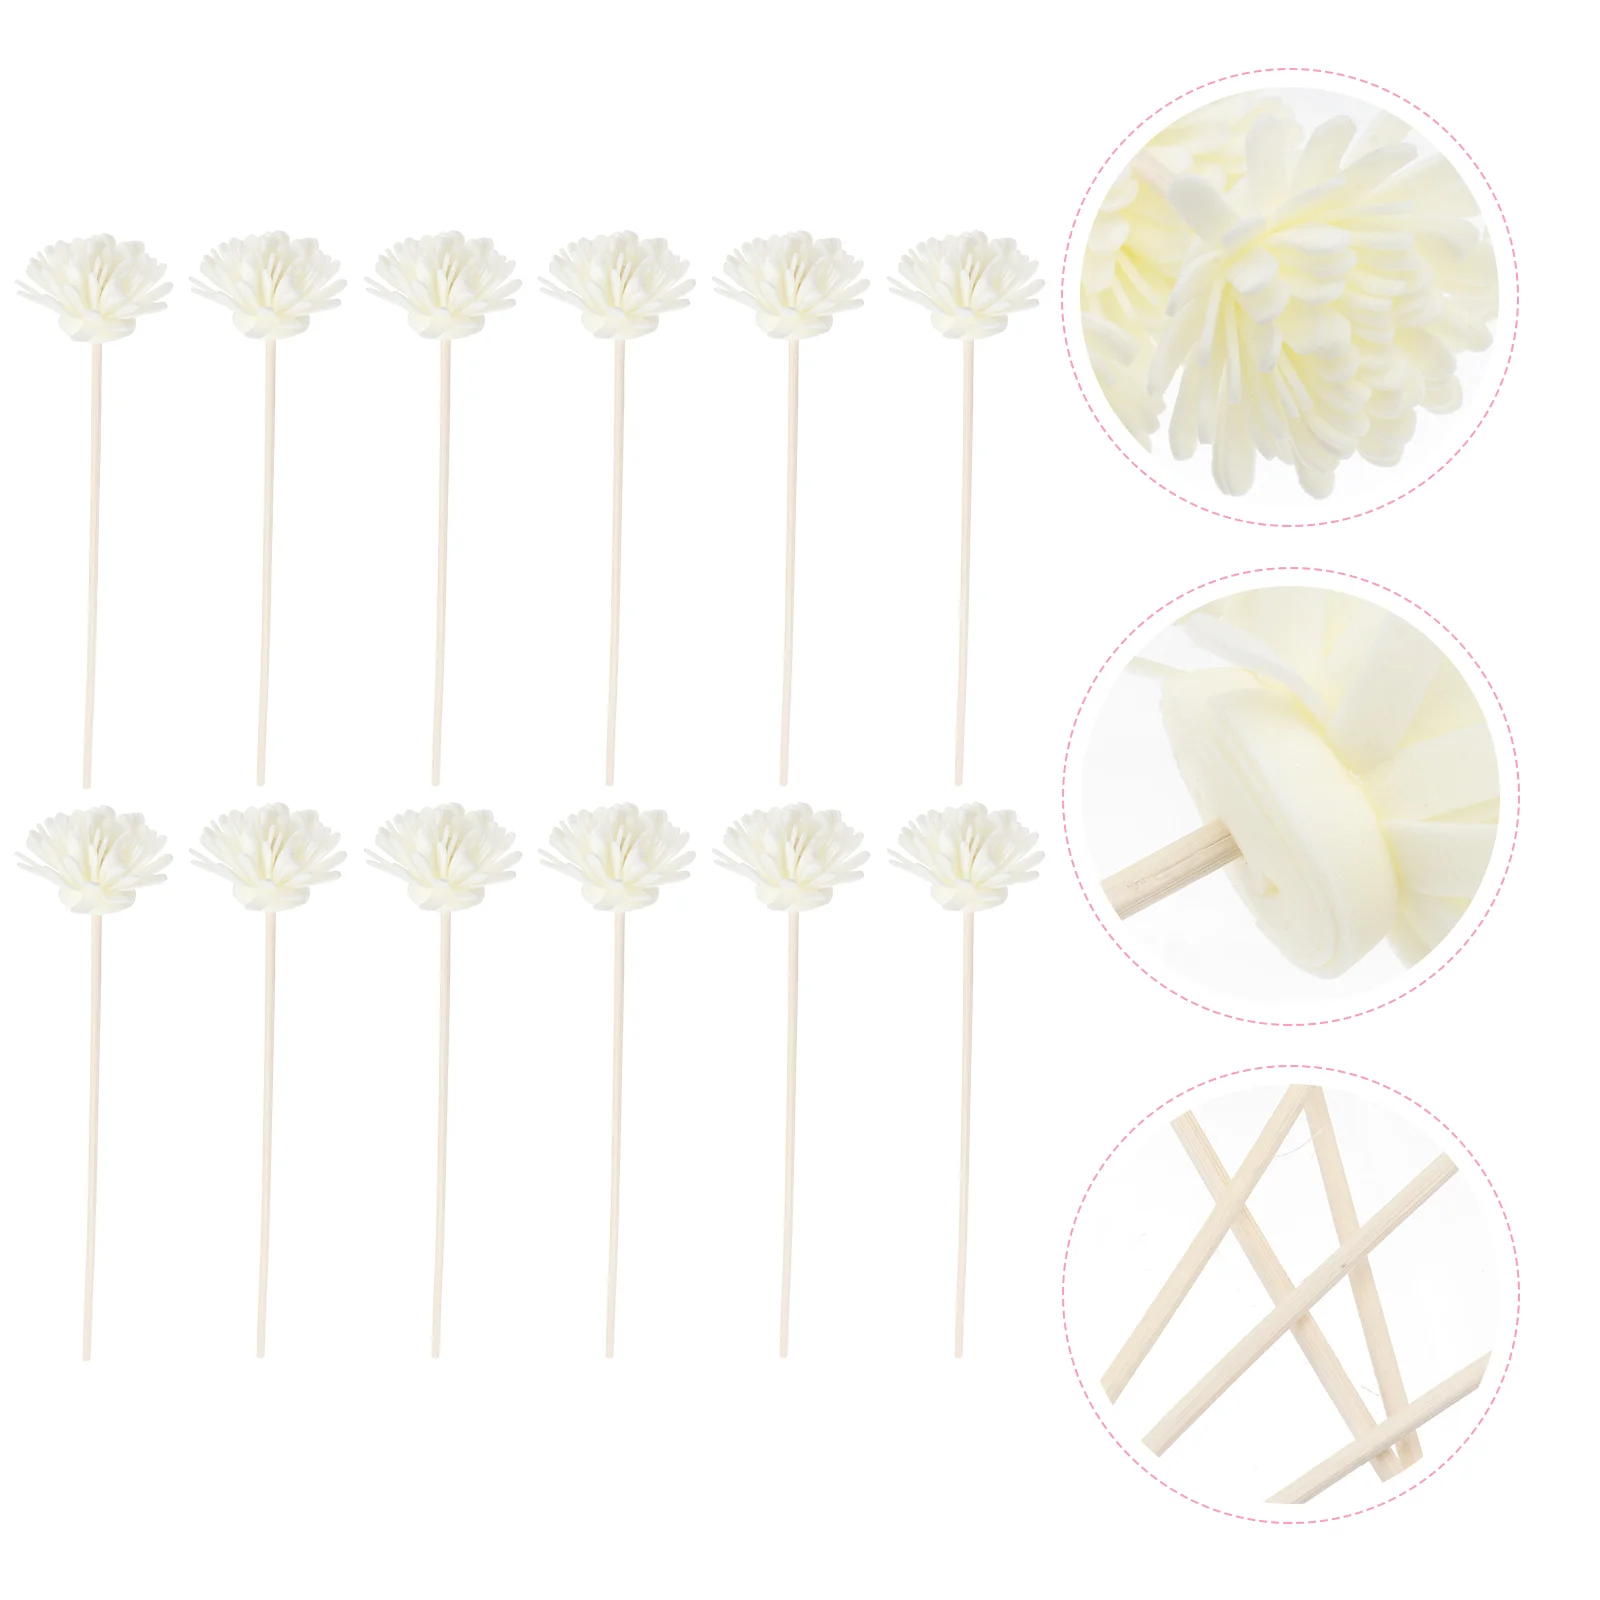 

12 Pcs Chrysanthemum Aromatherapy Rattan Supplies Sticks Flower Crafting Home Diffusers Simulated Handicrafts Accessories